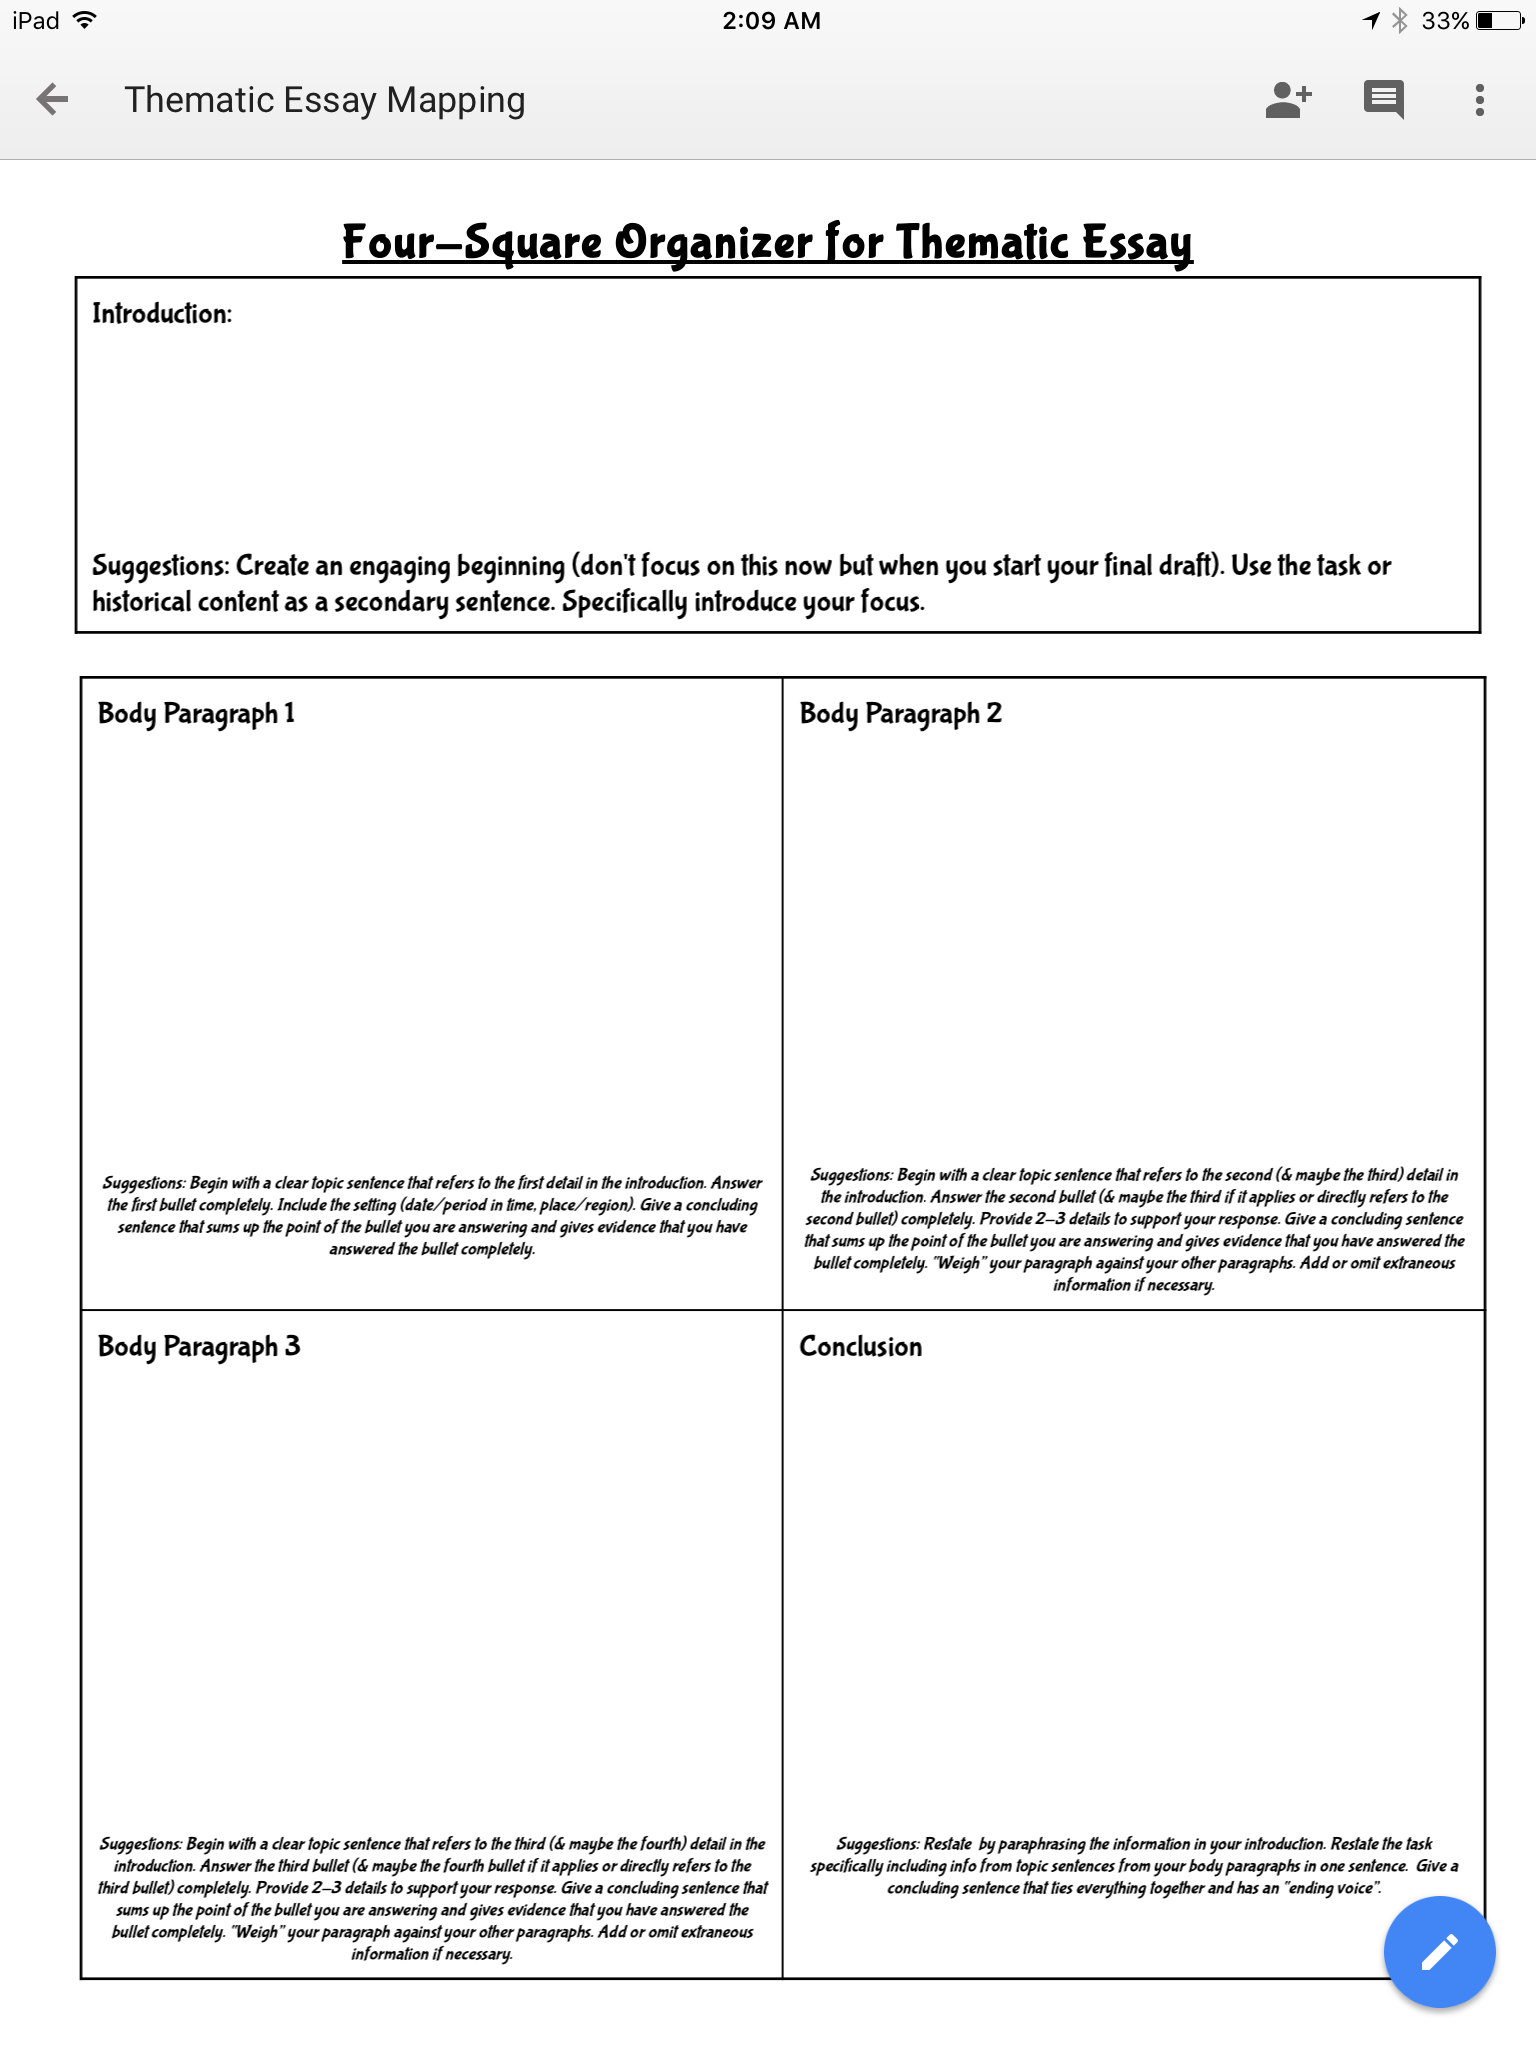 Essay clipart exam sheet. Graphic organizer for nys